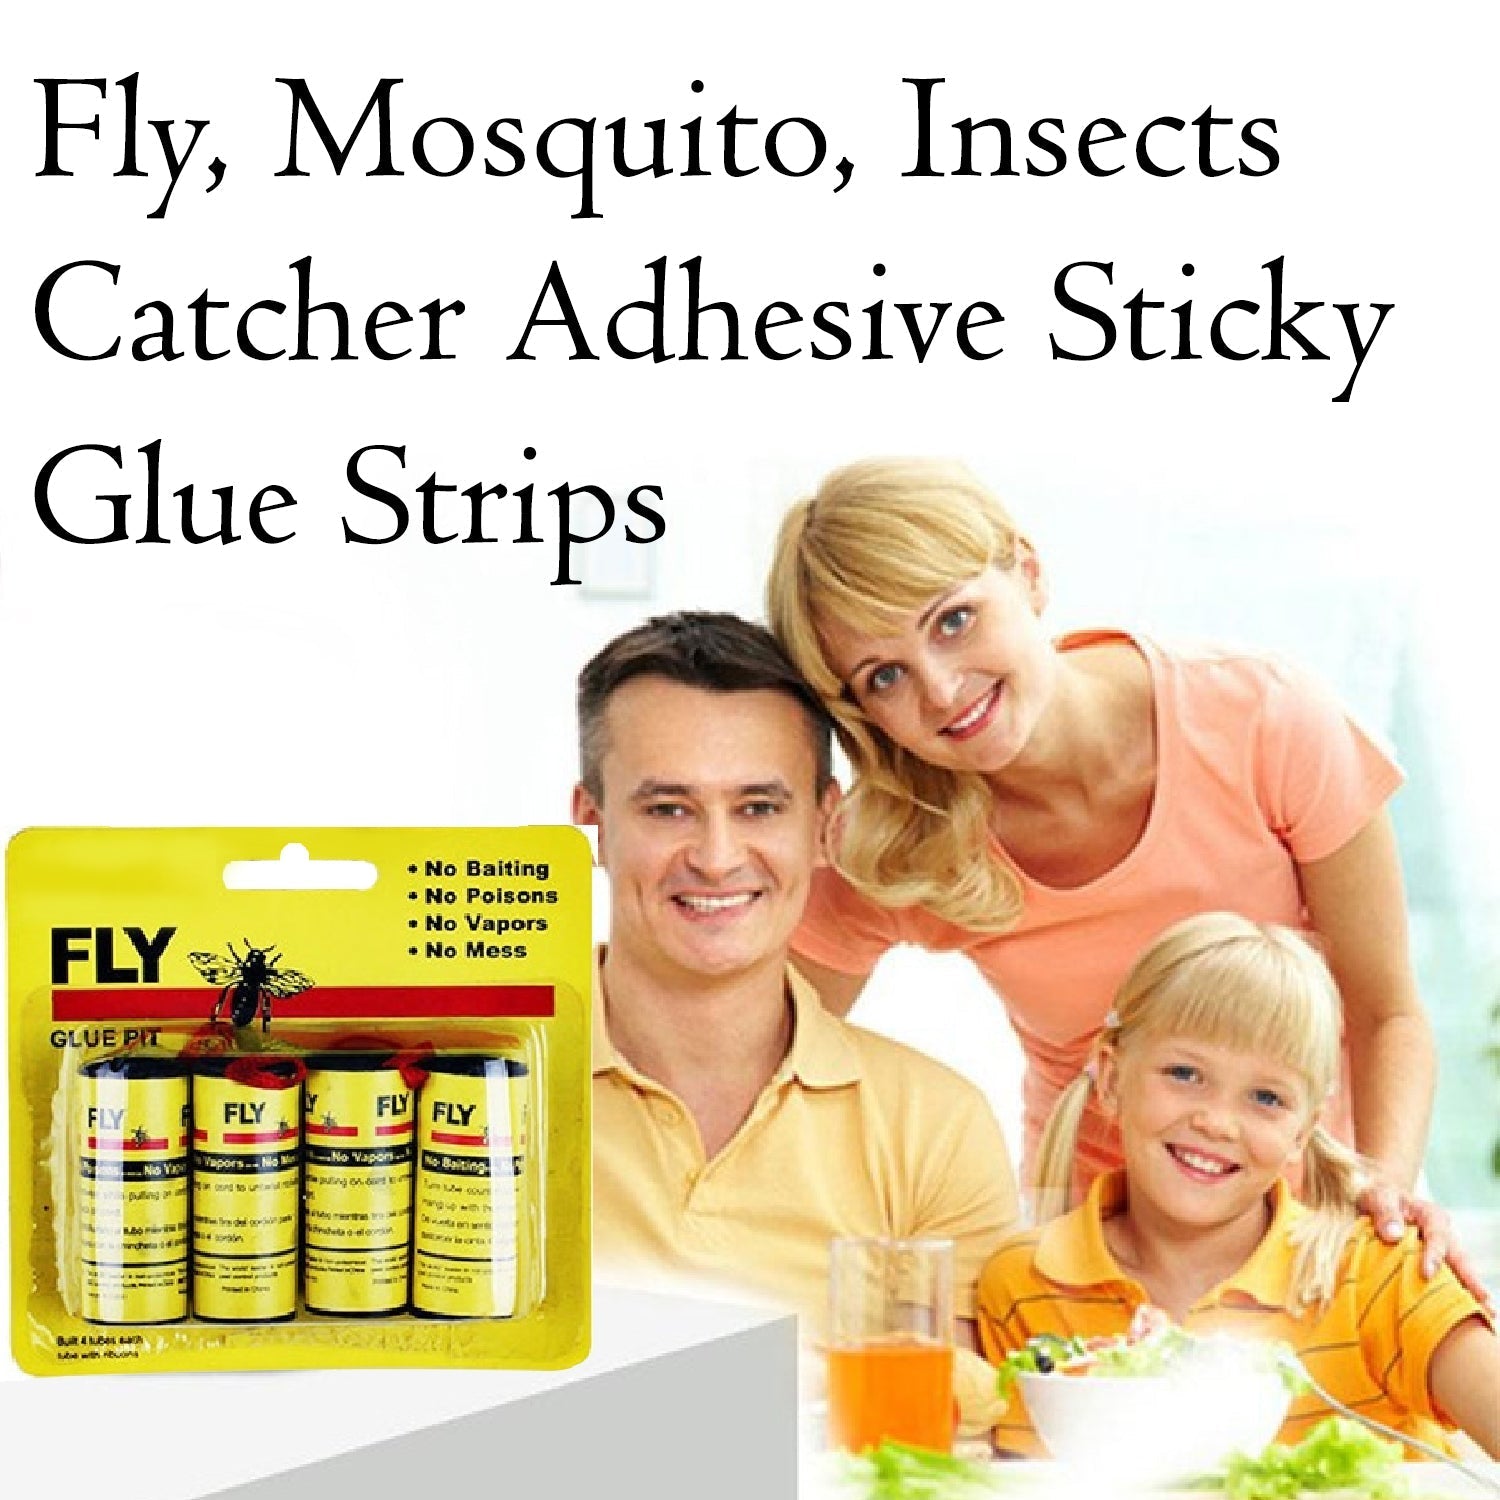 1474 Fly, Mosquito, Insects Catcher Adhesive Sticky Glue Strips DeoDap